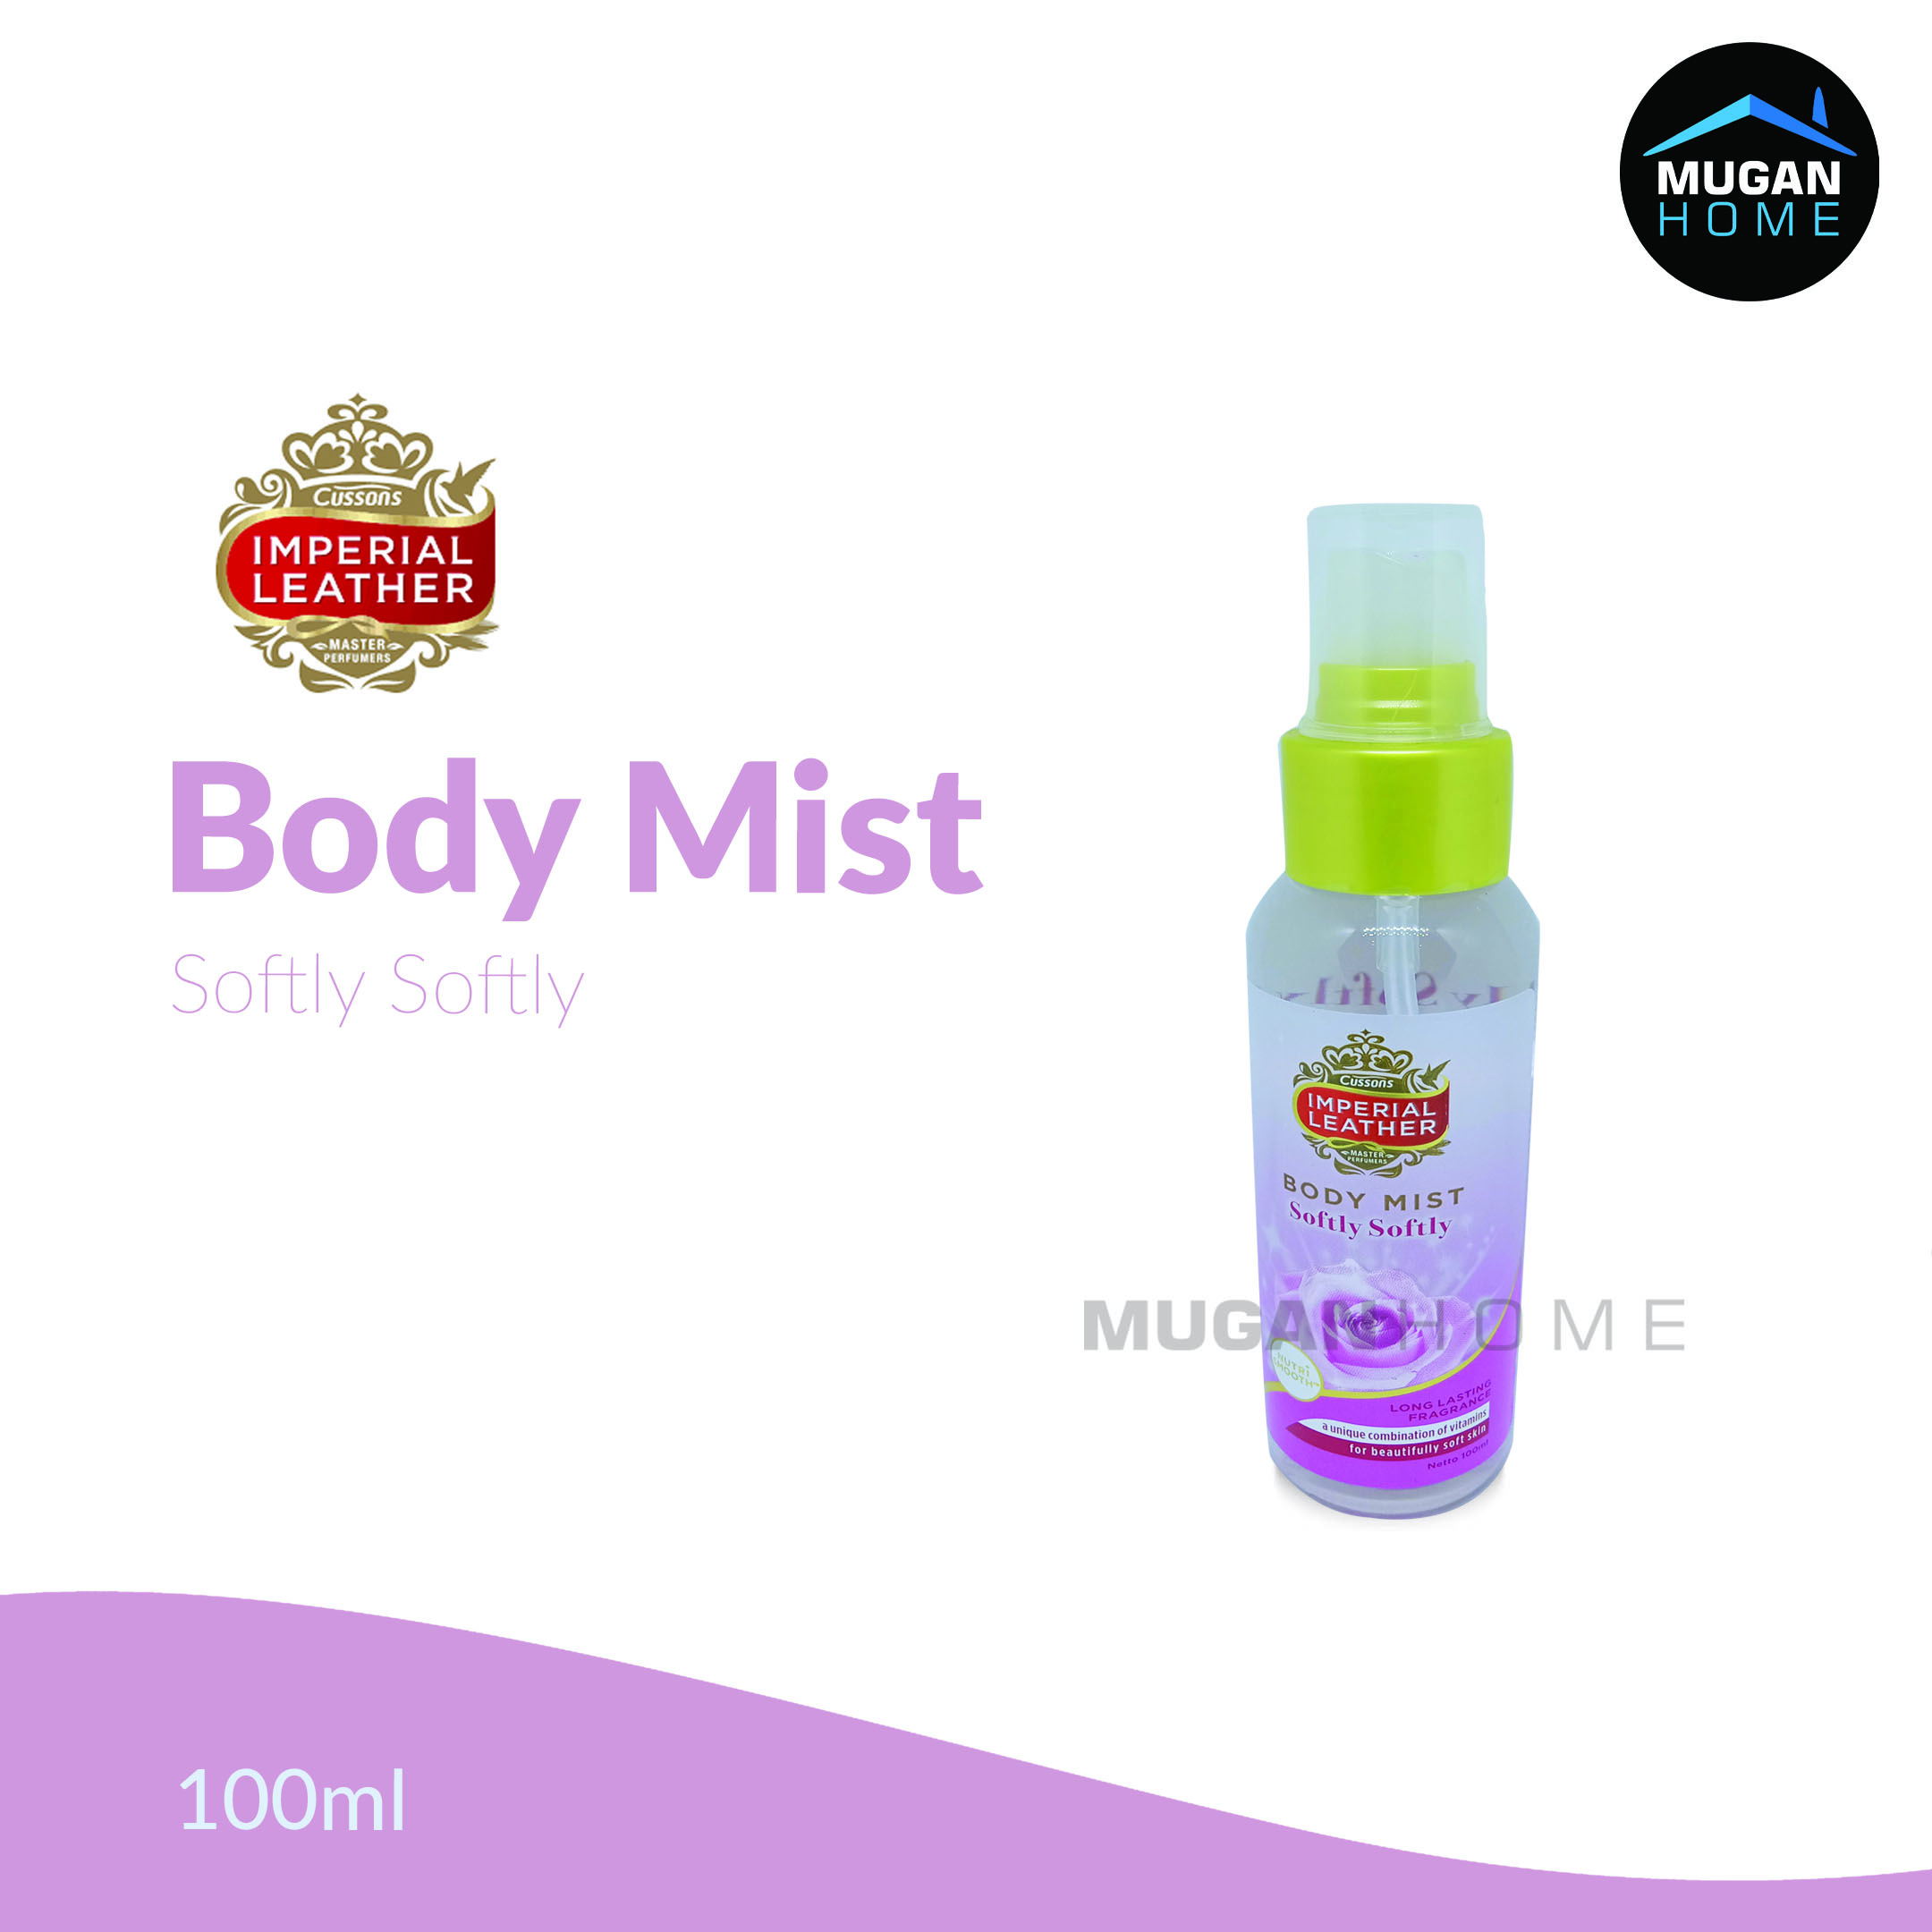 CUSSONS IMPERIAL LEATHER BODY MIST 100ML SOFTLY SOFTLY 